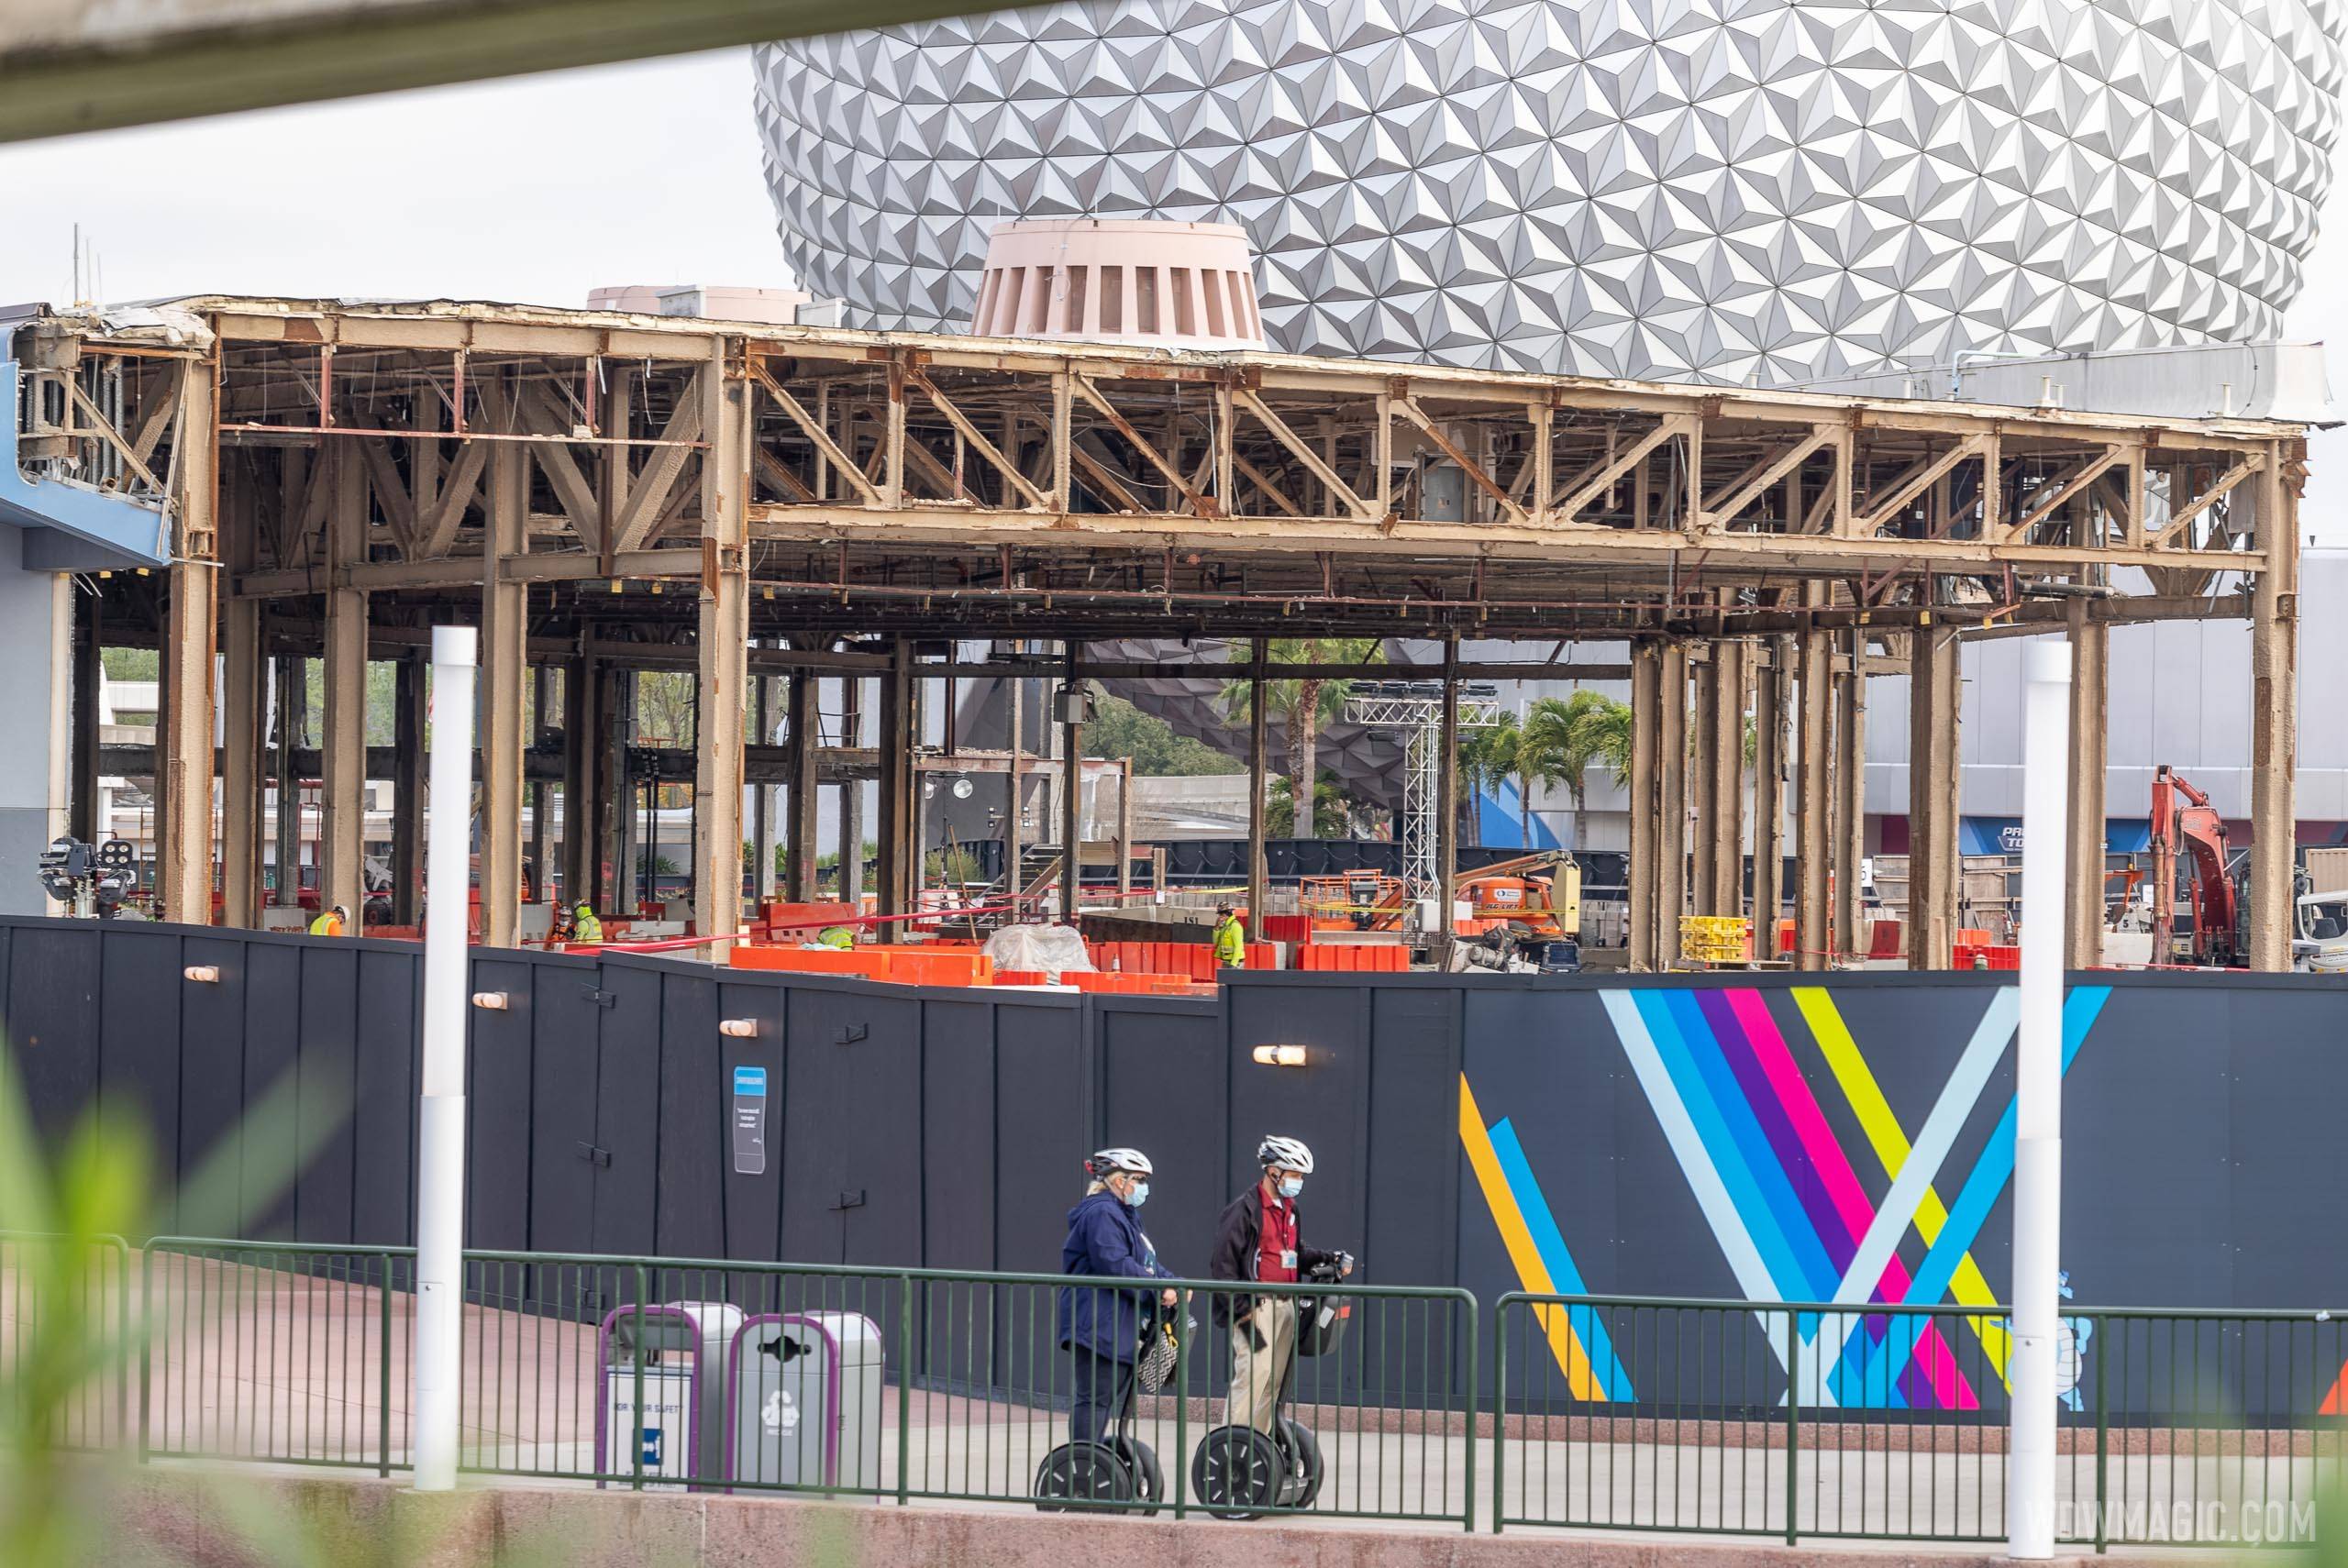 PHOTOS - Innoventions West demolition continues at EPCOT